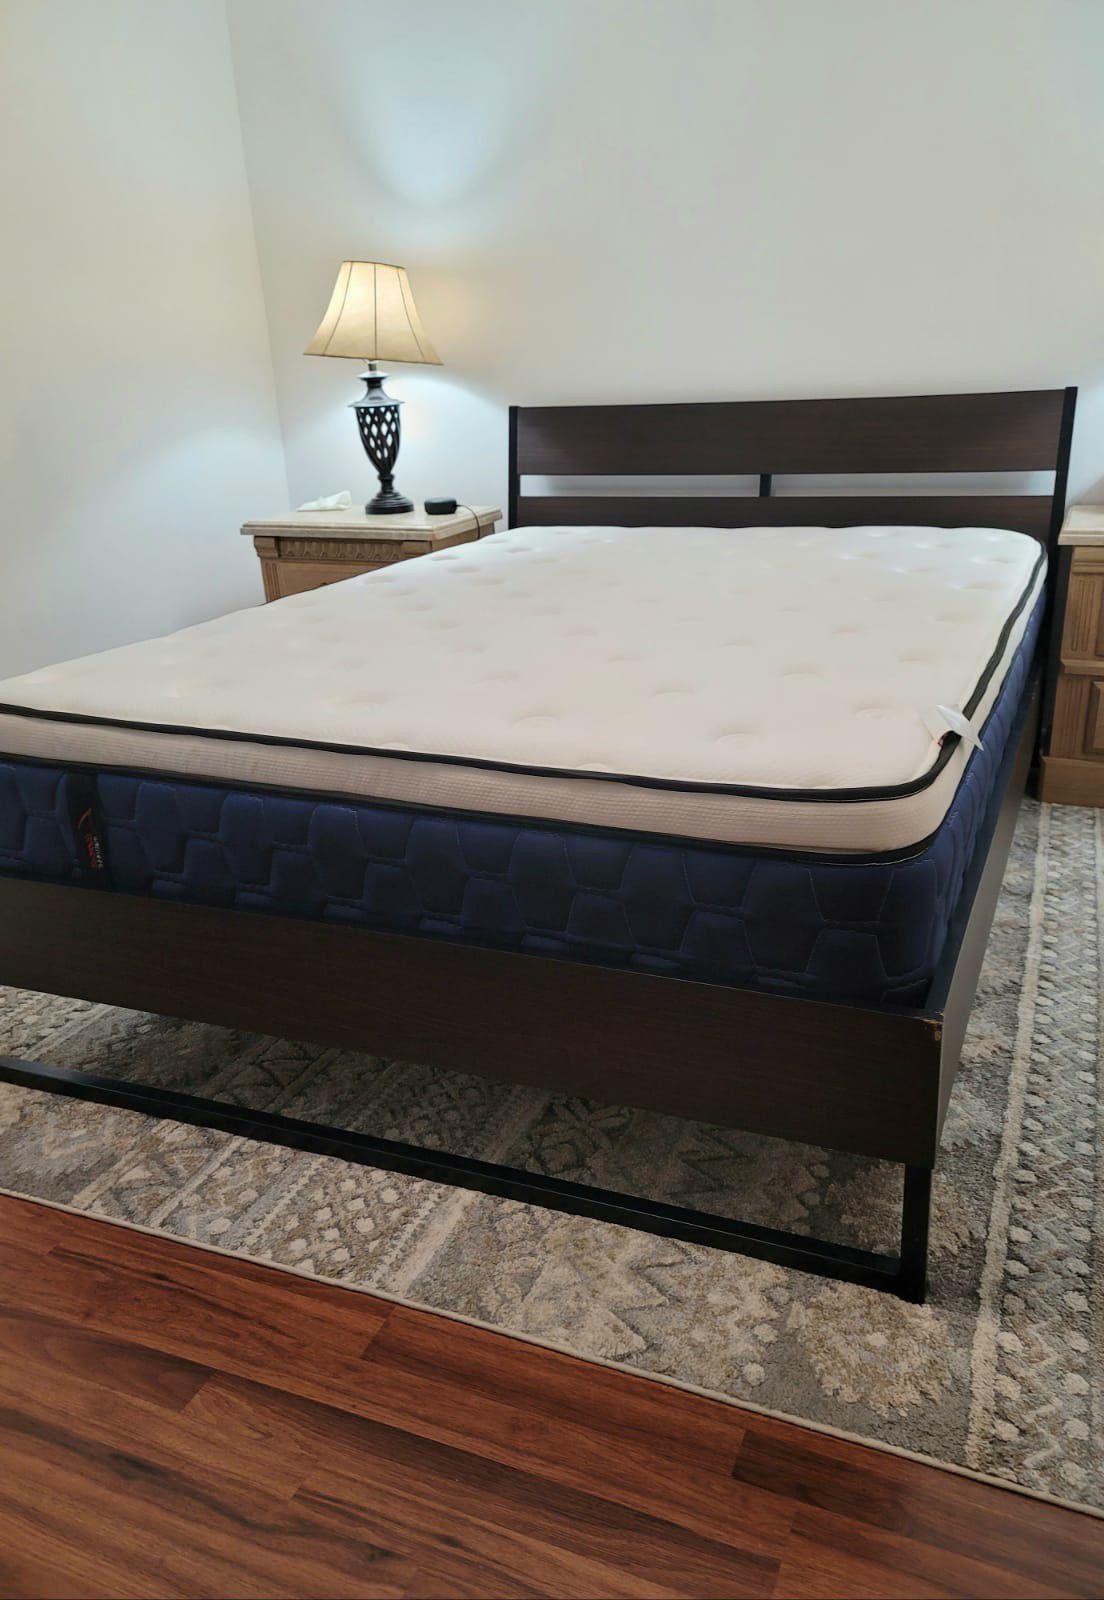 NEW QUEEN PILLOWTOP MATTRESS AND BOX SPRING 2PC, bed frame not included on price